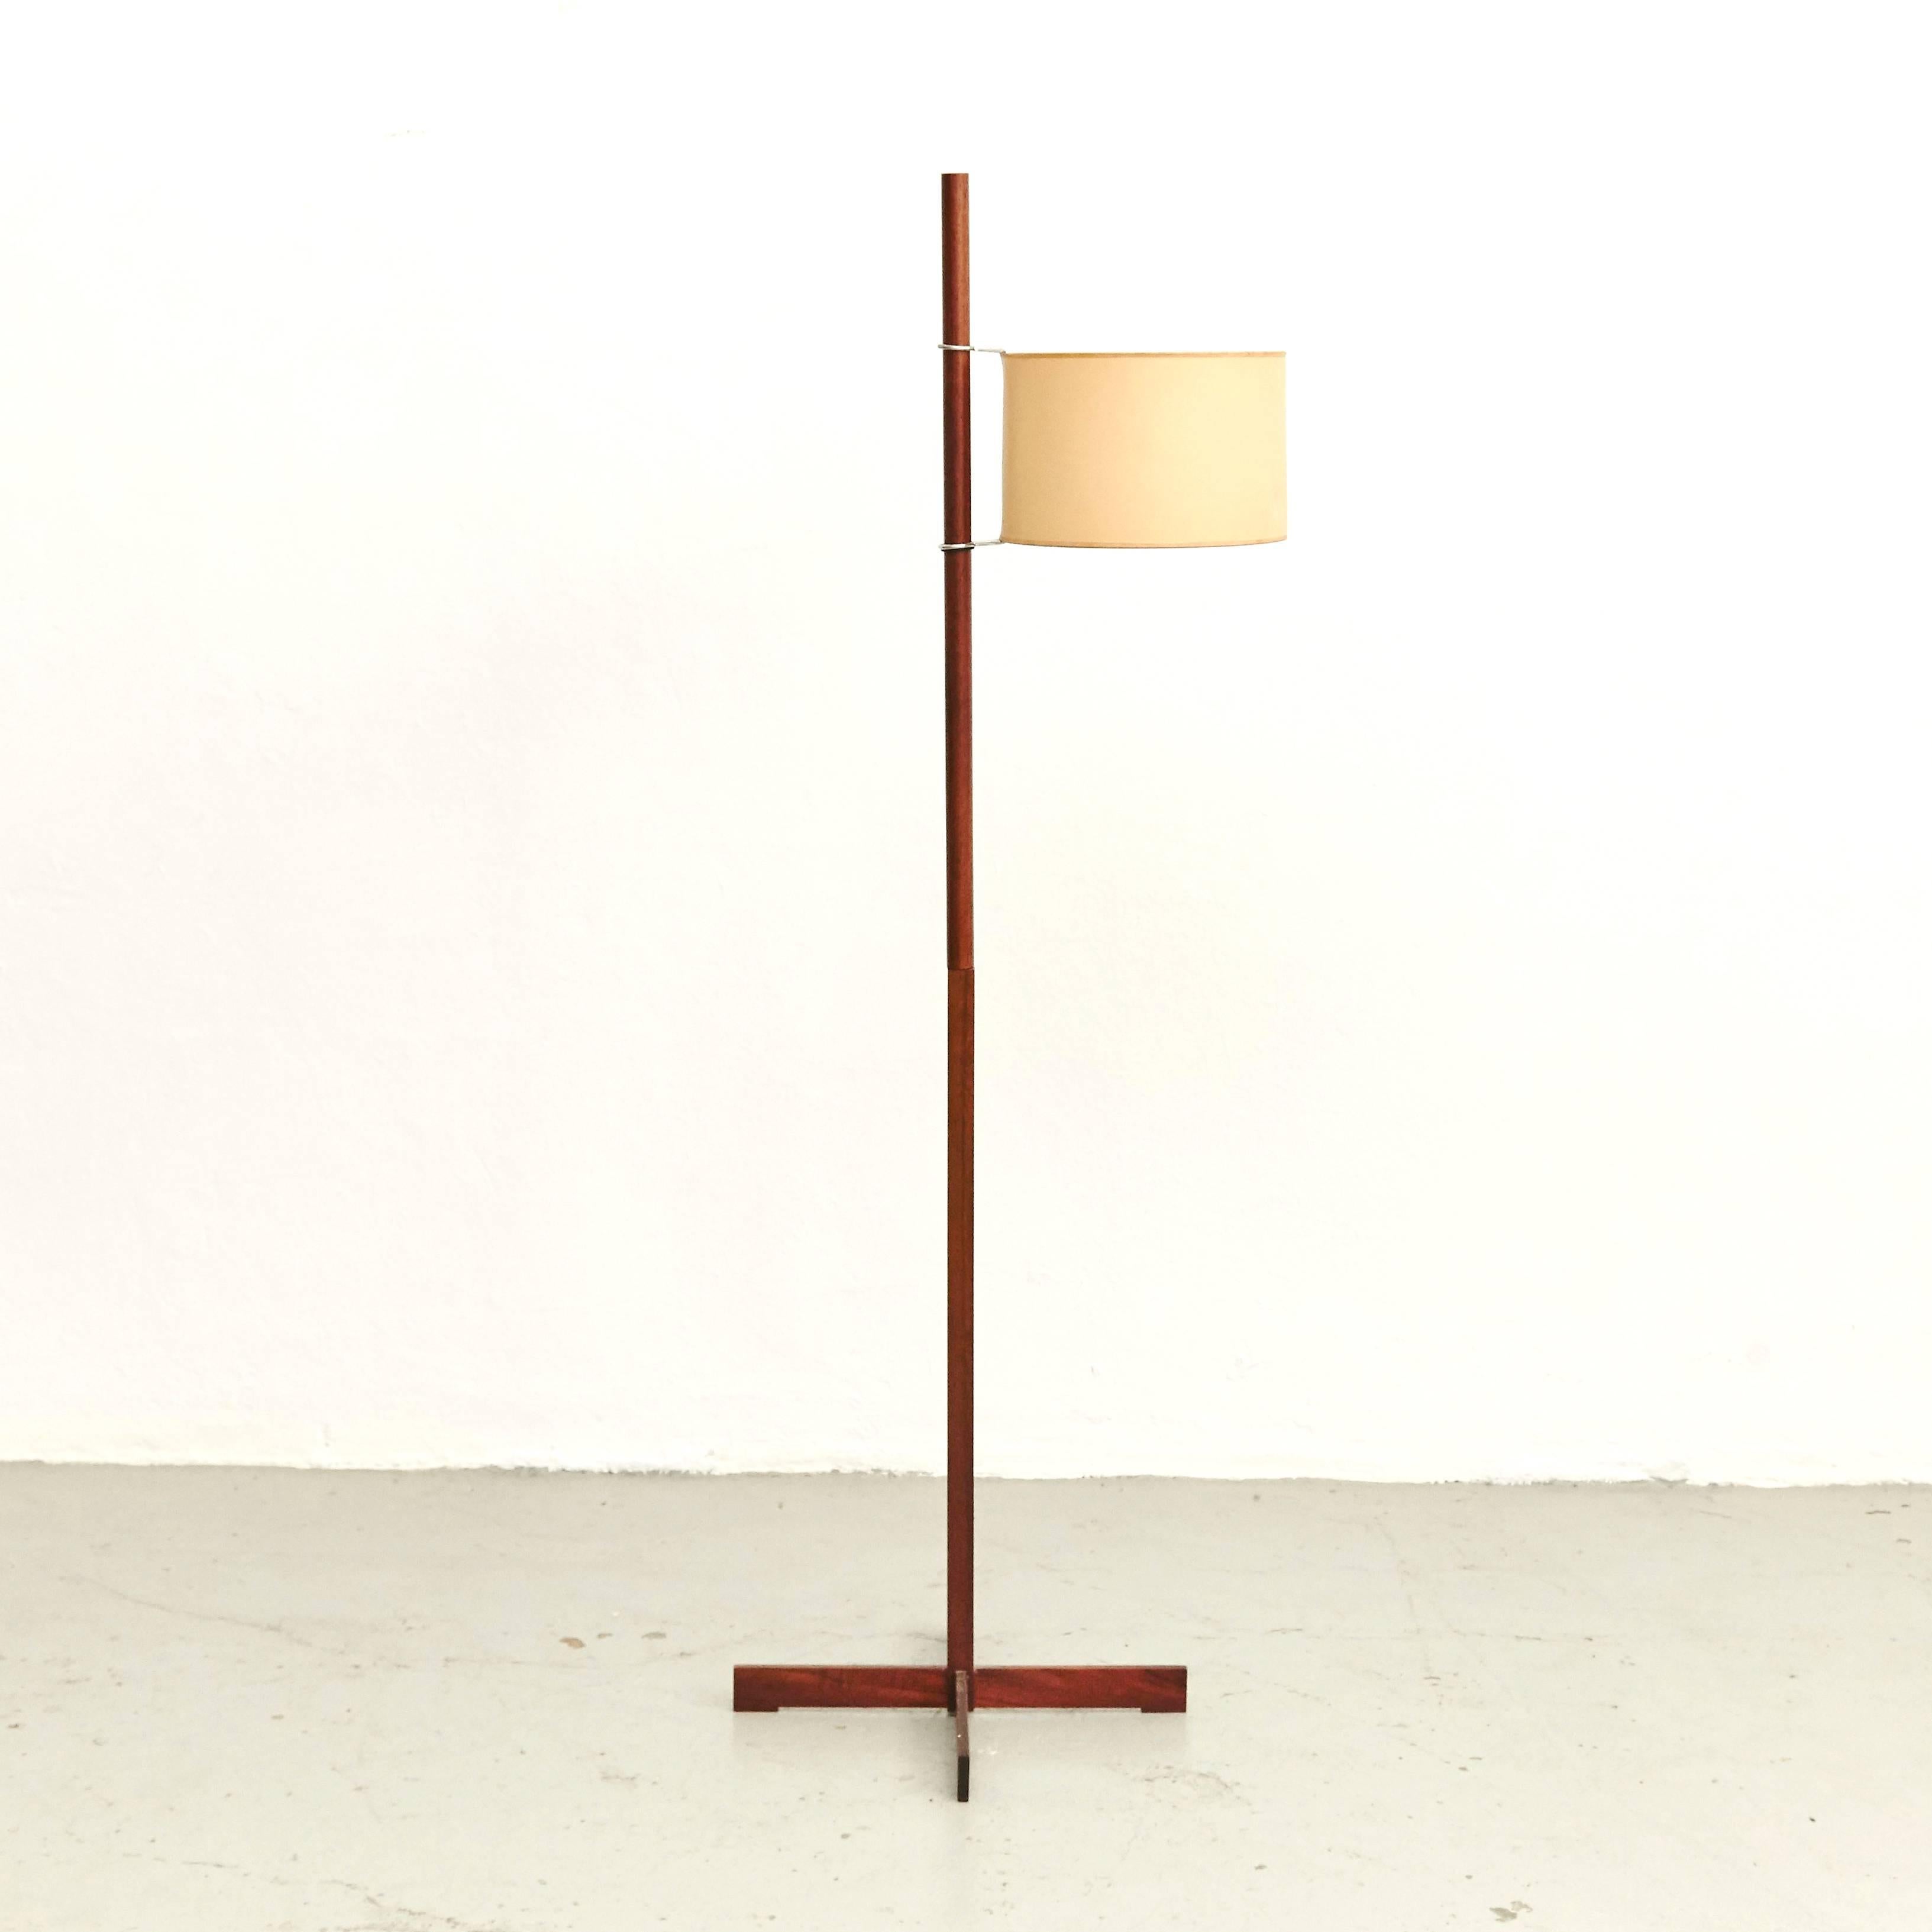 TMM family of floor lamps designed by Miguel Milá, circa 1961.
Manufactured by Tramo (Spain), circa 1961.
Wood structure and paper lampshade.

In good original condition, with minor wear consistent with age and use, preserving a beautiful